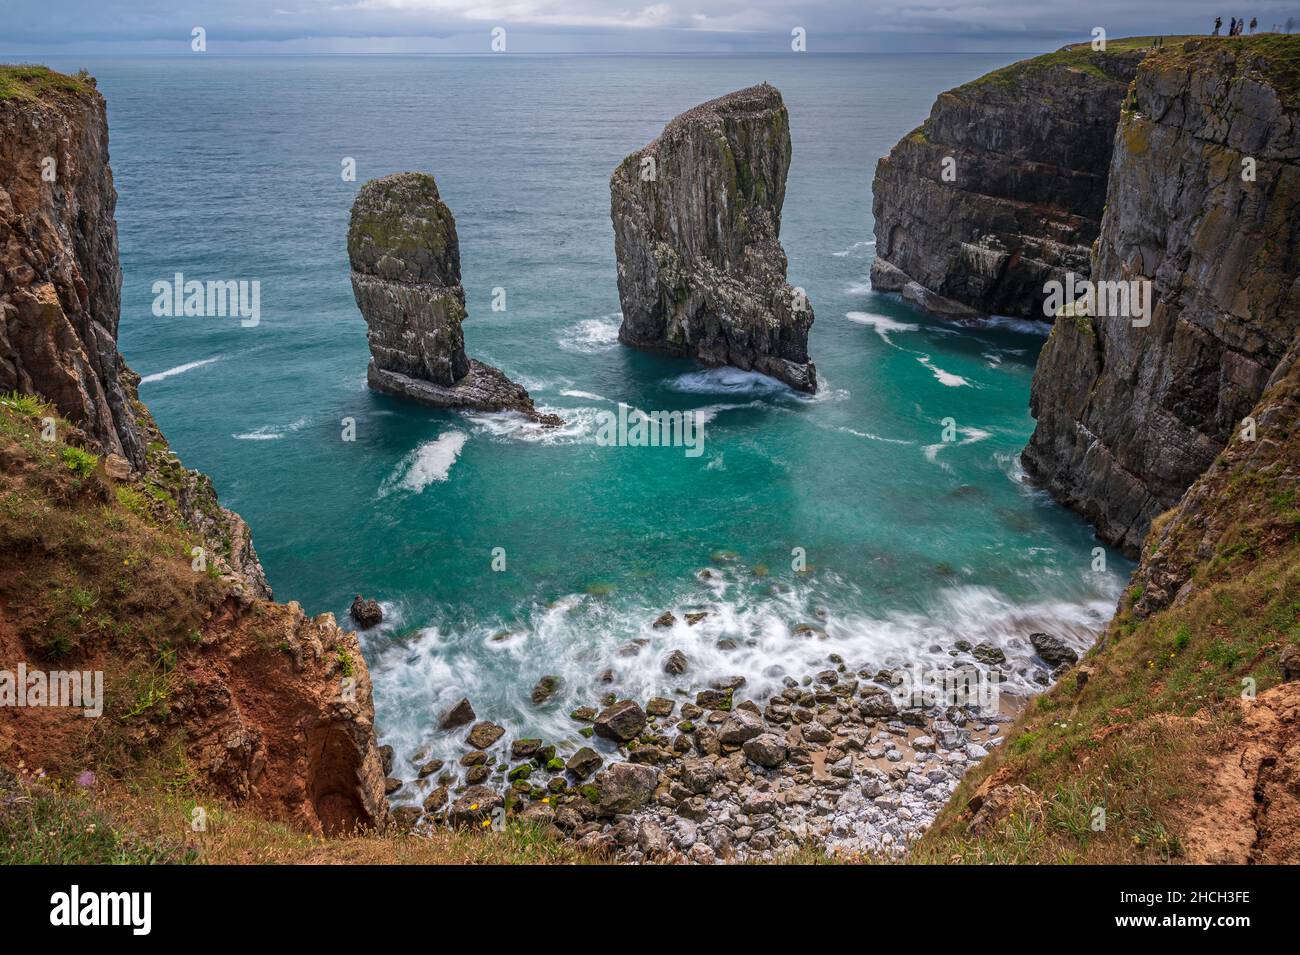 Elegug Stacks, Pembrokeshire, south Wales. The stacks are a unique geological formation that can be seem from the Wales coastal path. Stock Photo